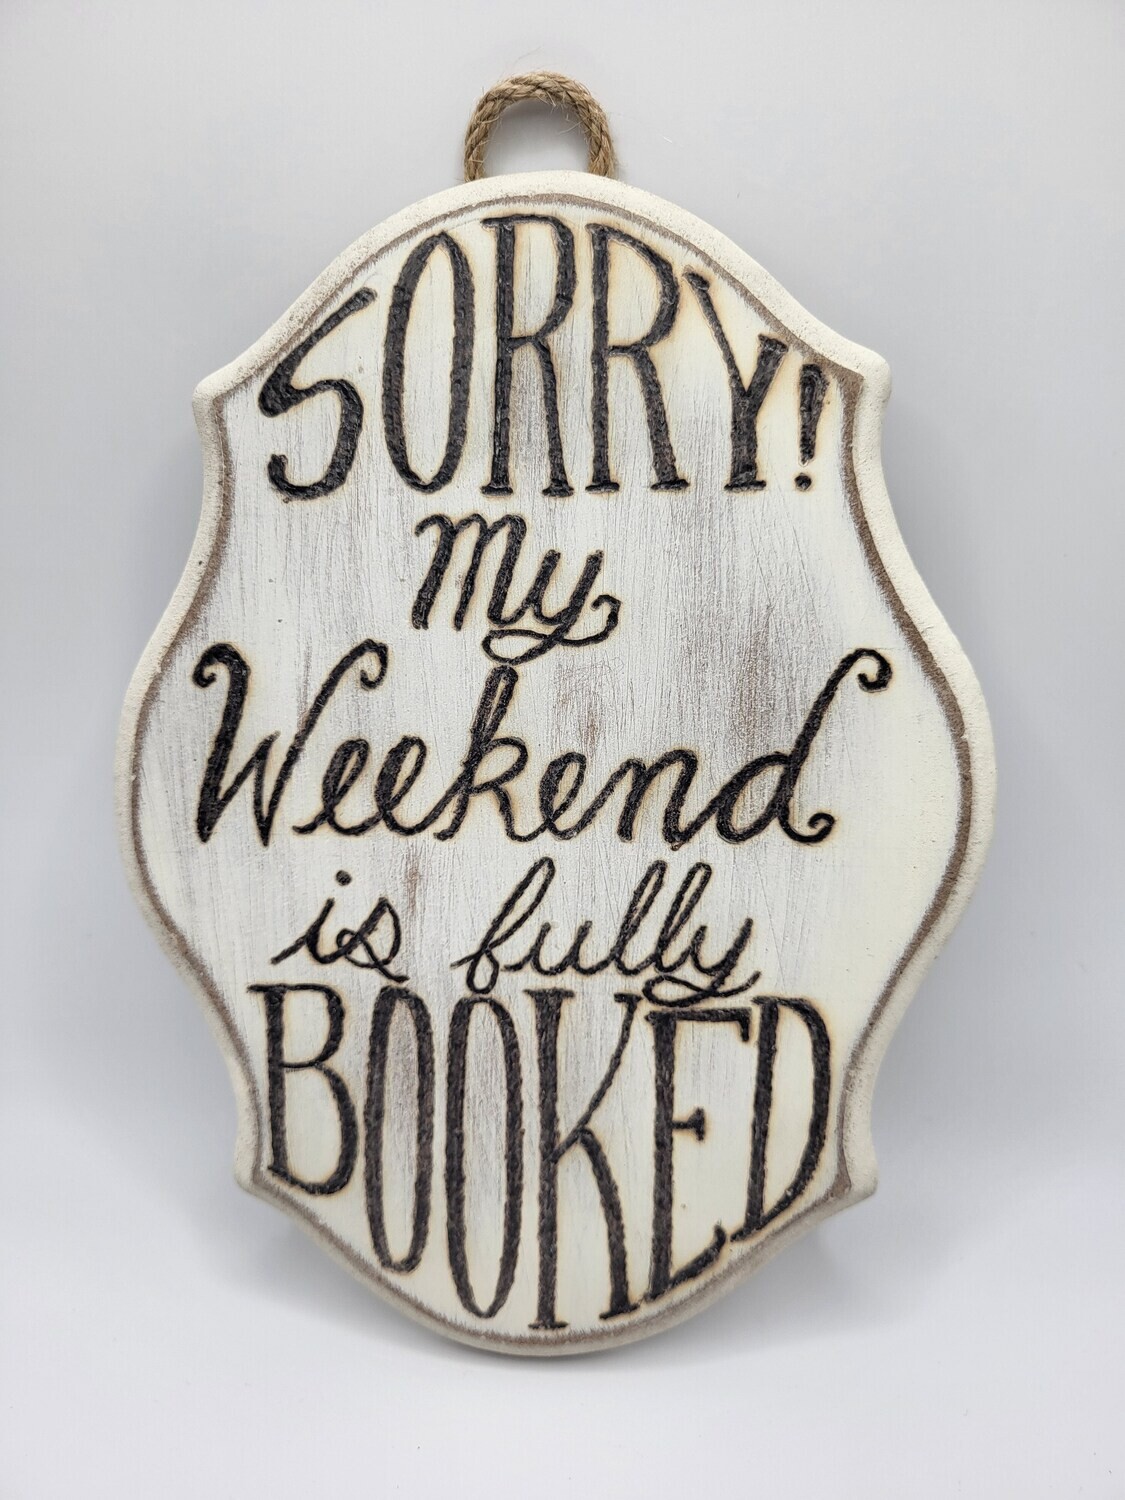 Sorry! My Weekend is fully booked